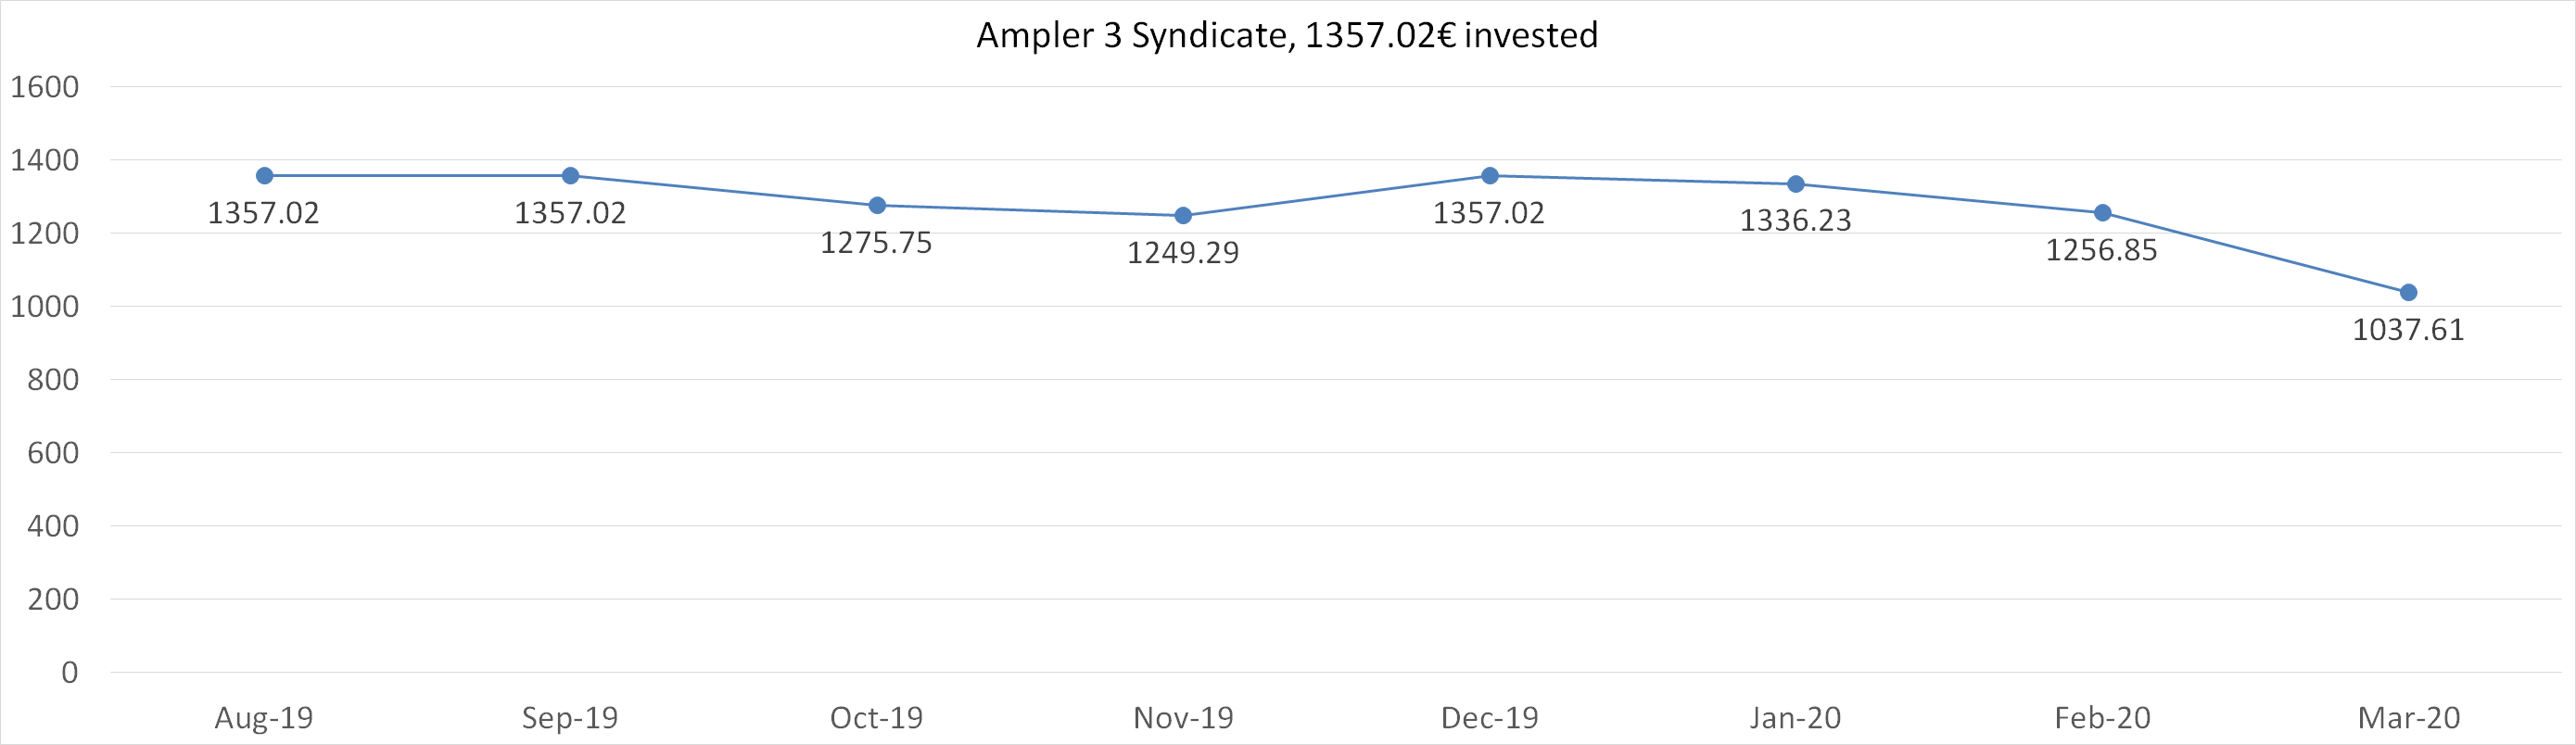 Ampler 3 syndicate, 1357,02 worth in march 2020